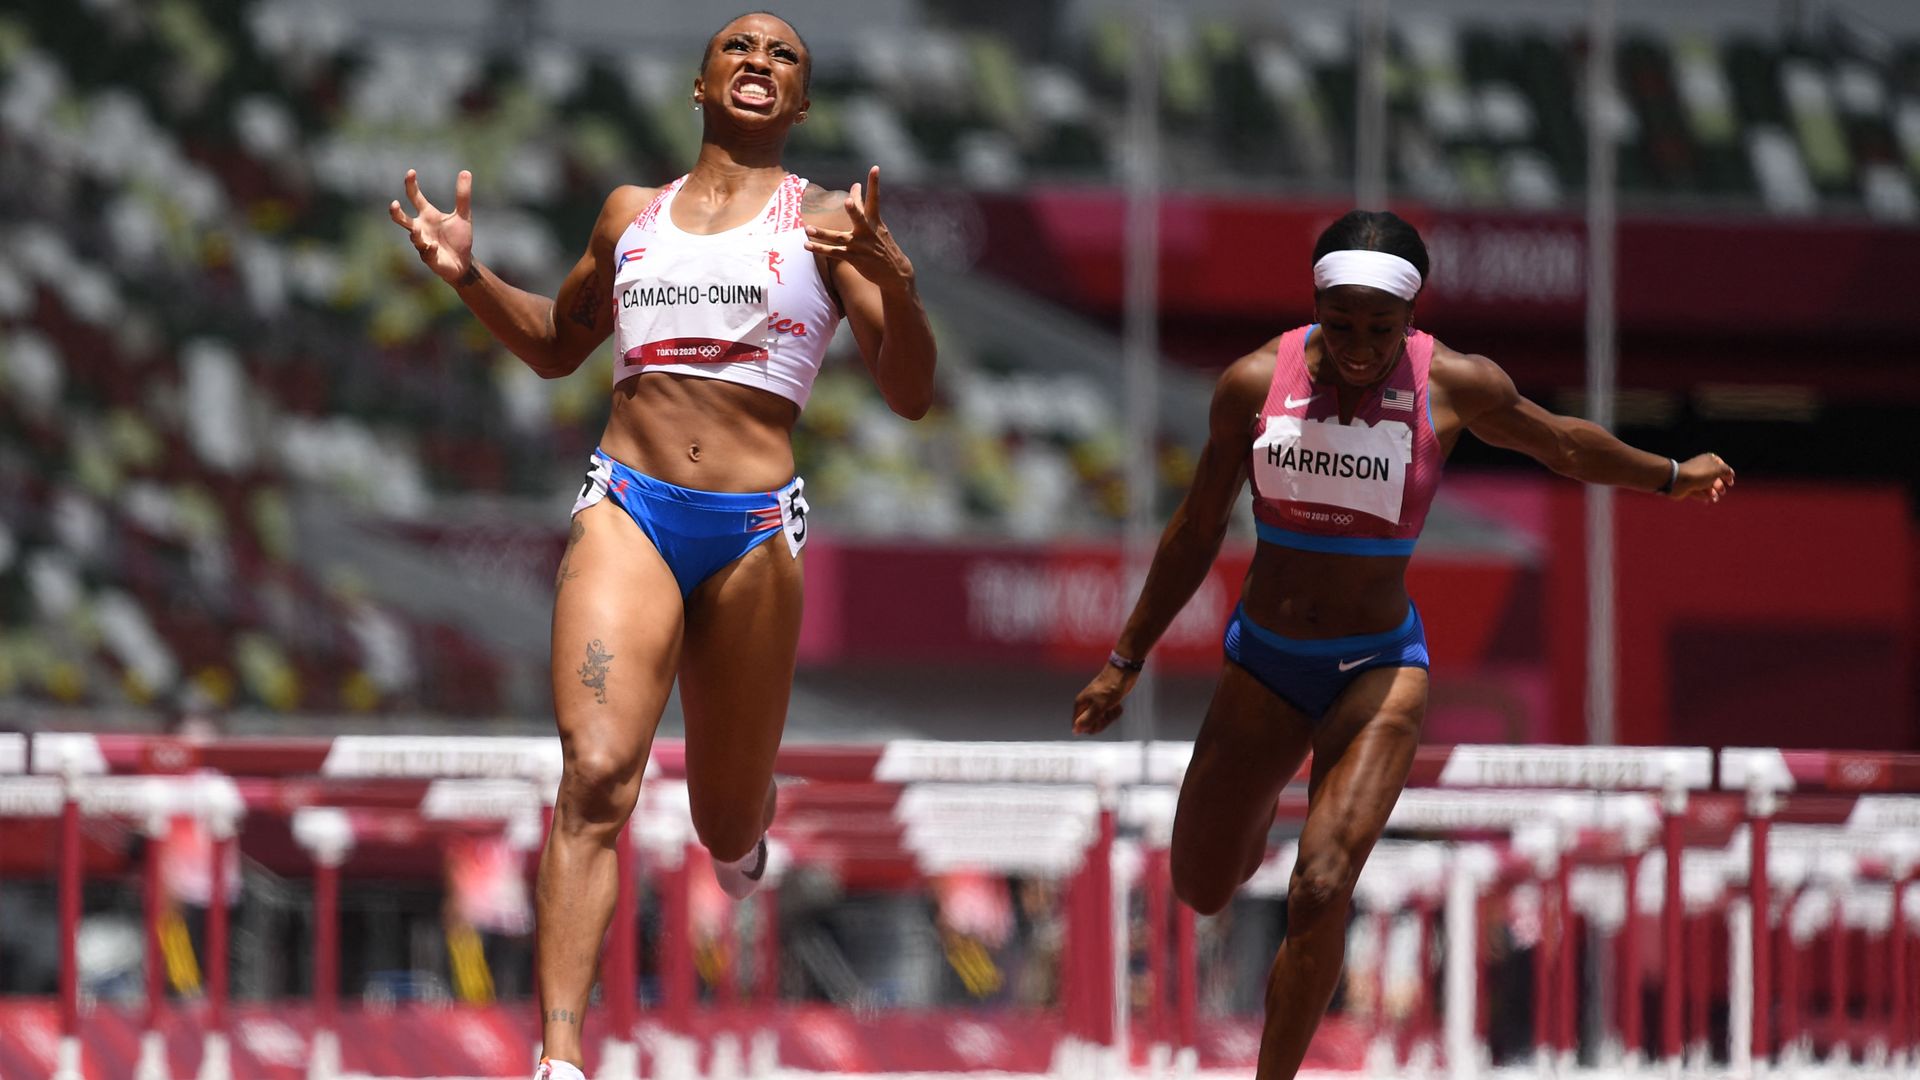 Puerto Rico's Jasmine Camacho-Quinn (L) wins ahead of USA's Kendra Harrison in the women's 100m hurdles final during the Tokyo 2020 Olympic Games  on August 2